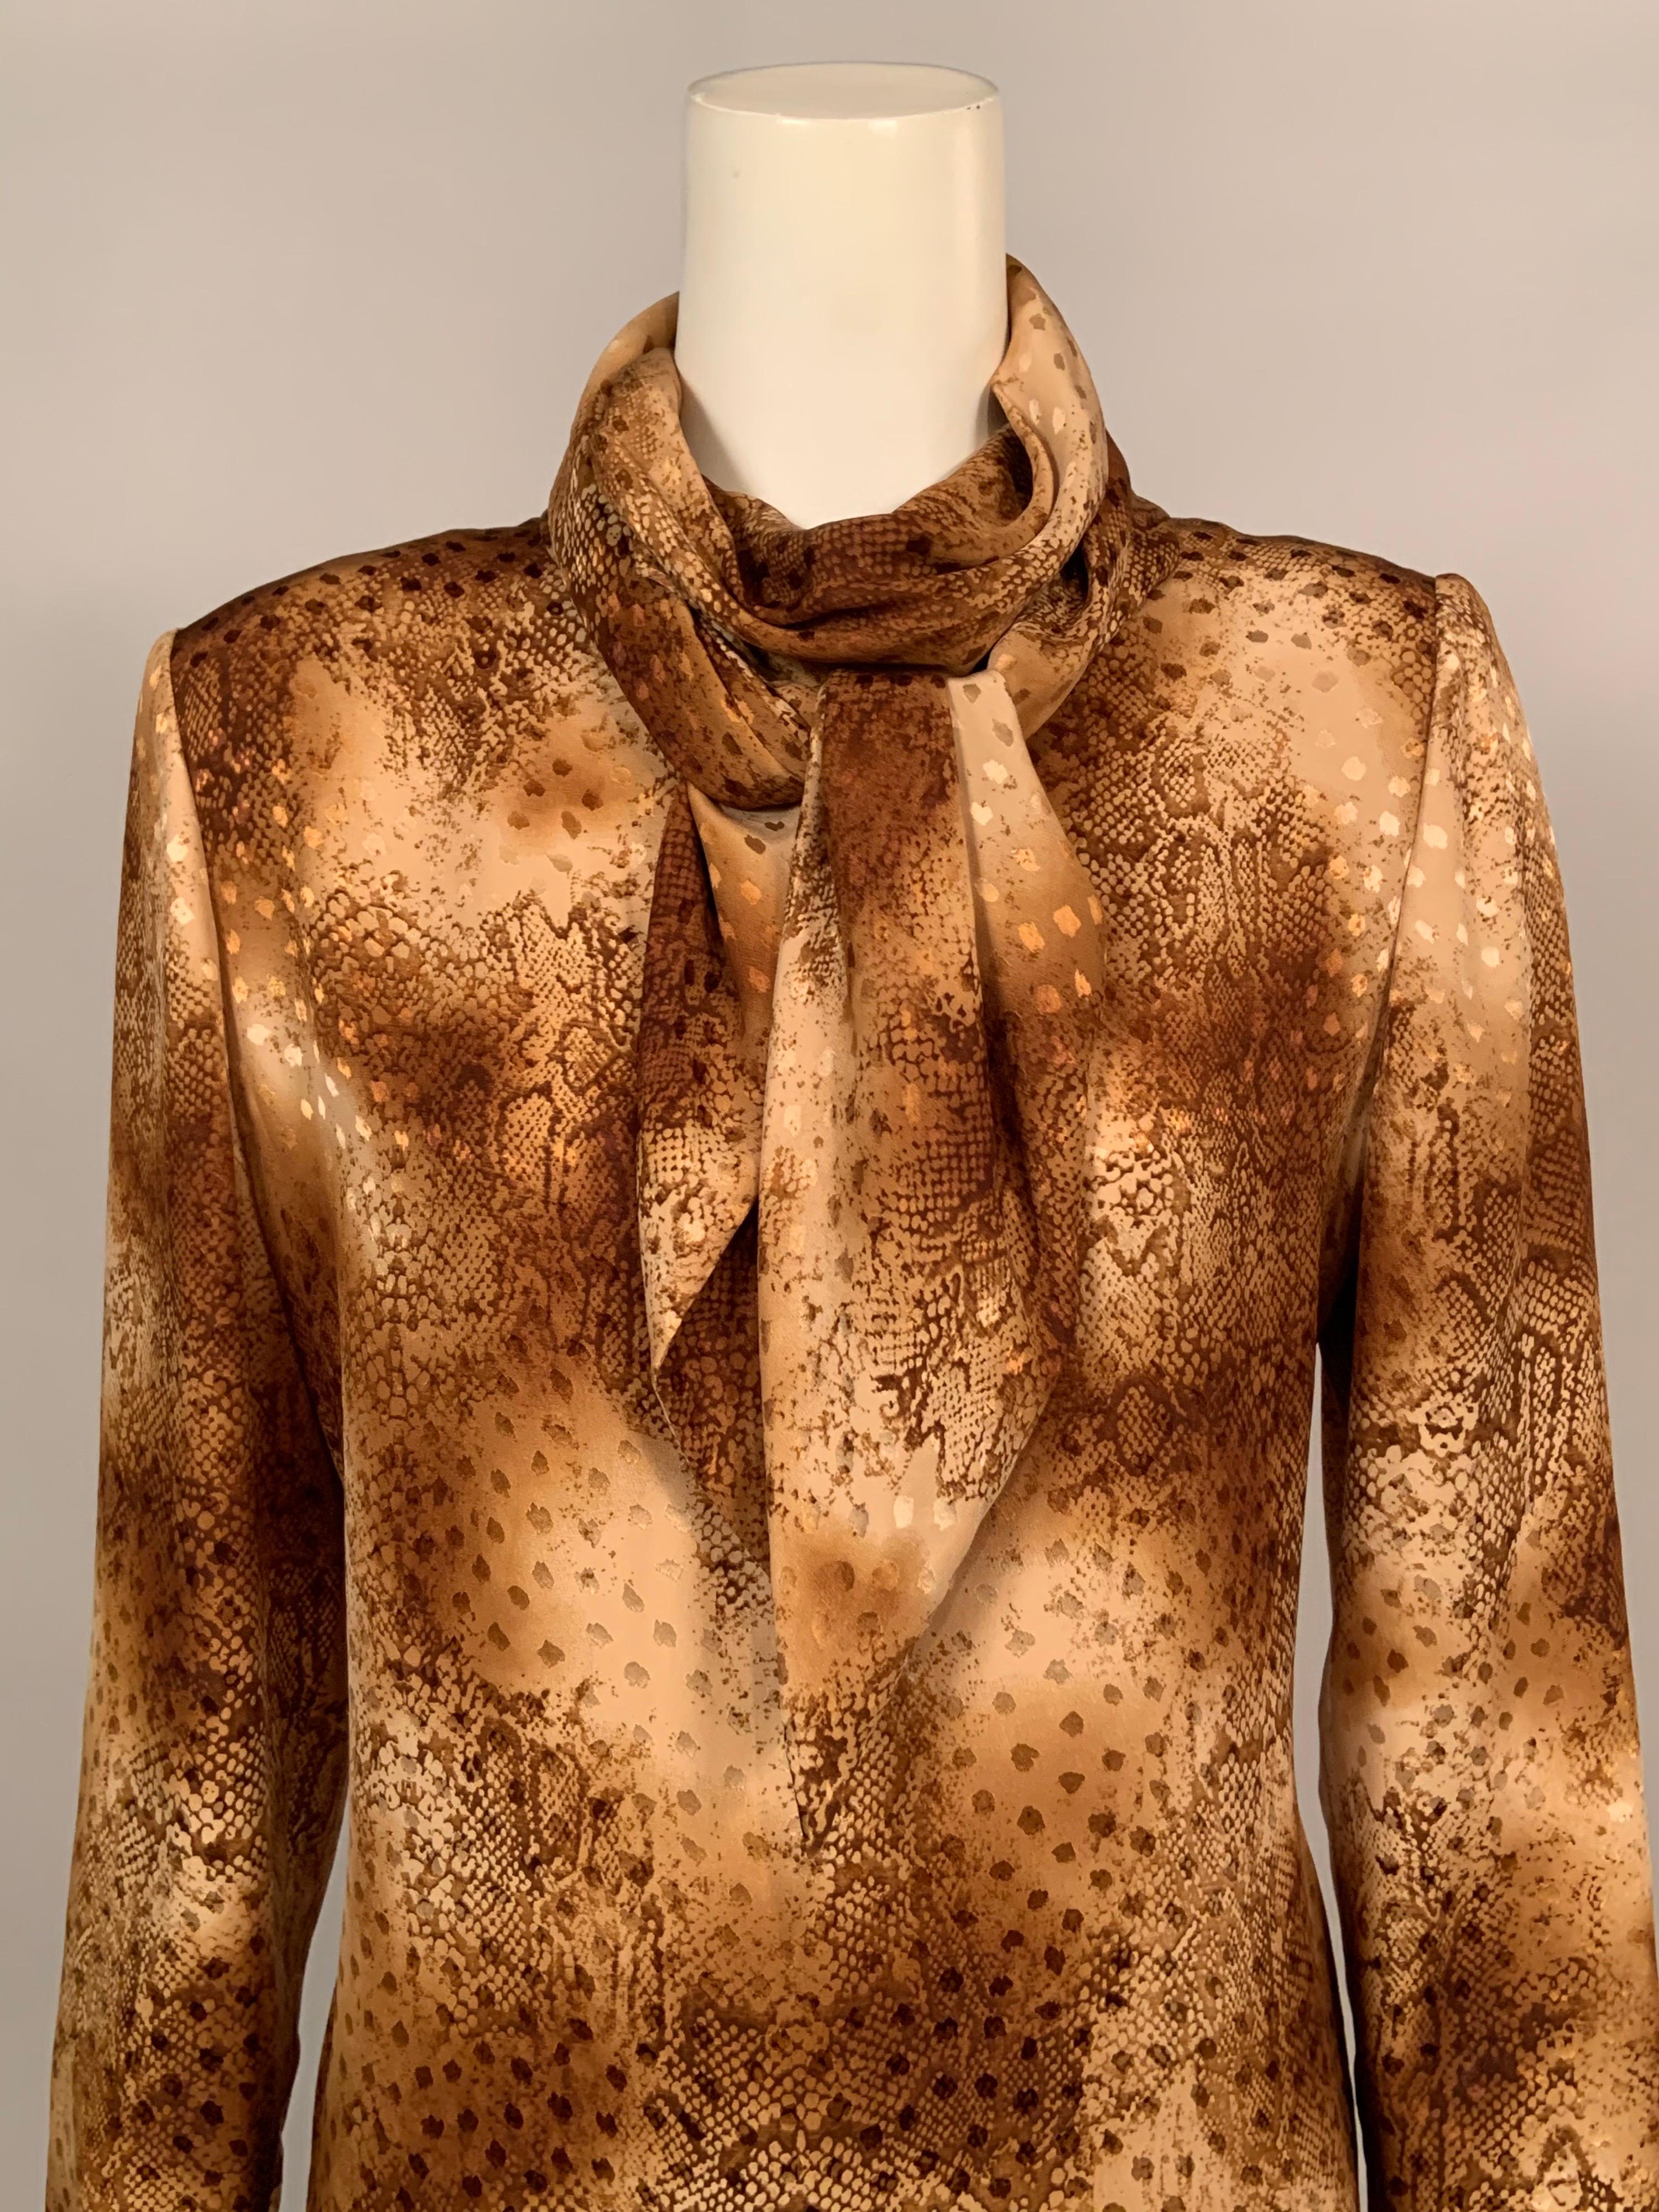 This elegant silk blouse from Bill Blass is made from woven silk that has a spotted  pattern enhanced by a snakeskin print in warm shades of beige and brown.  The blouse has an attached scarf neckline, self covered buttons and loops at the wrist and